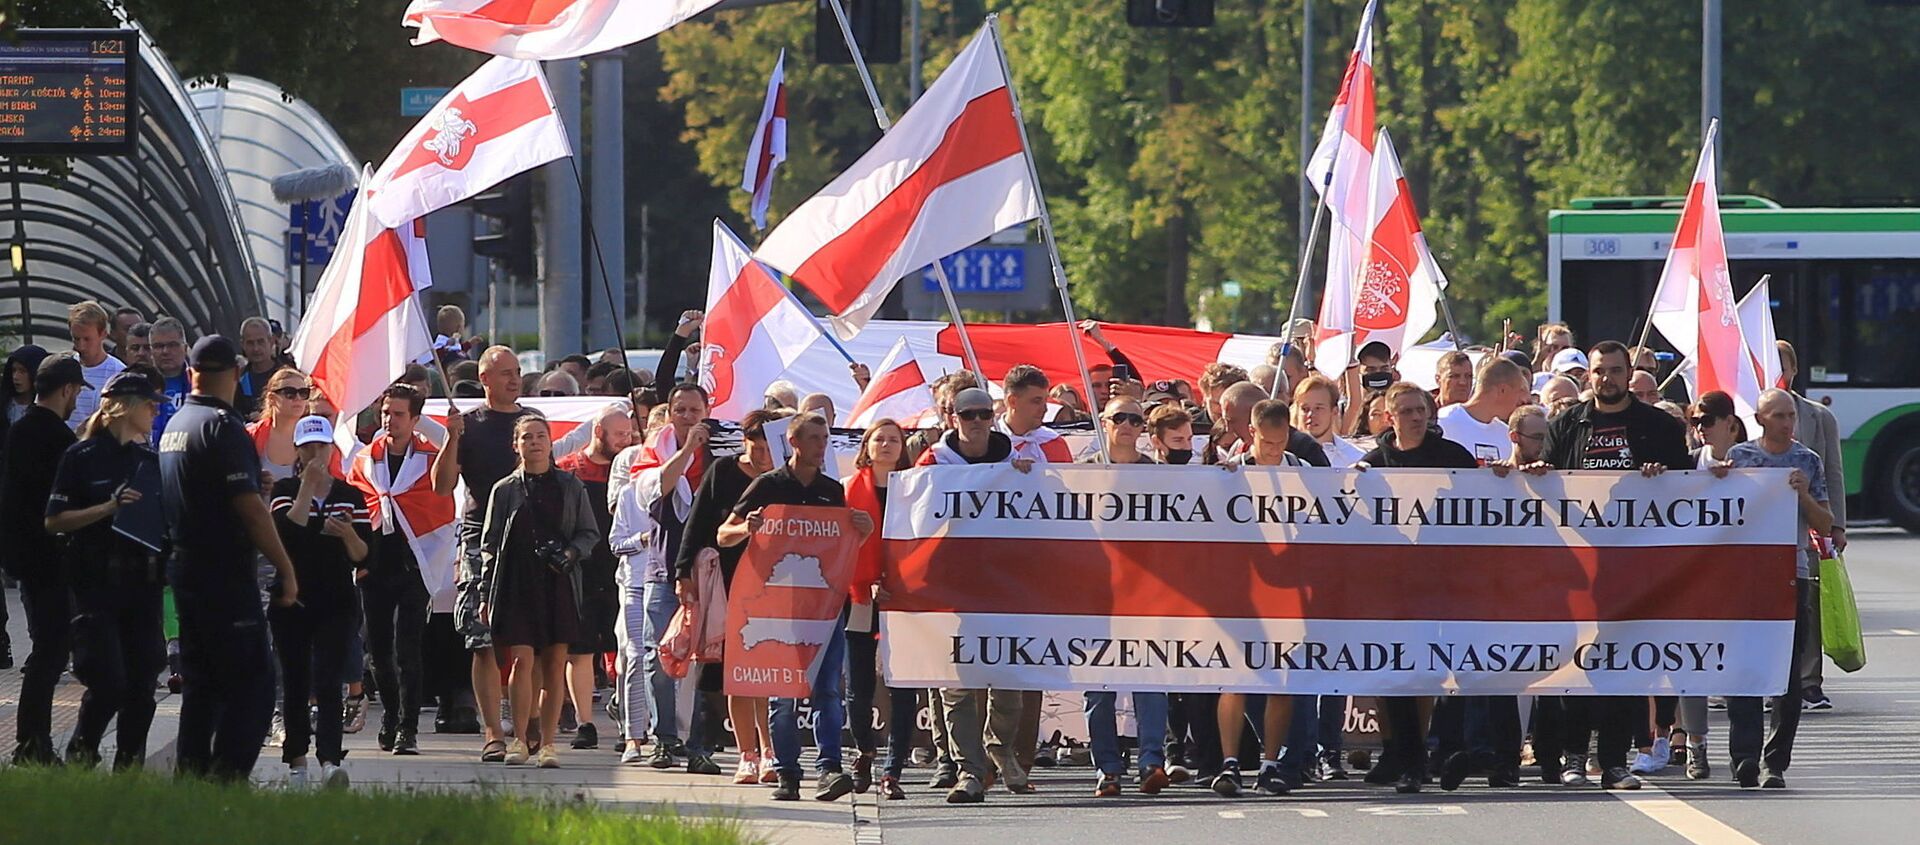 People march at the Global Solidarity Event for Belarus protest in Bialystok, Poland August 8, 2021 - Sputnik International, 1920, 08.08.2021